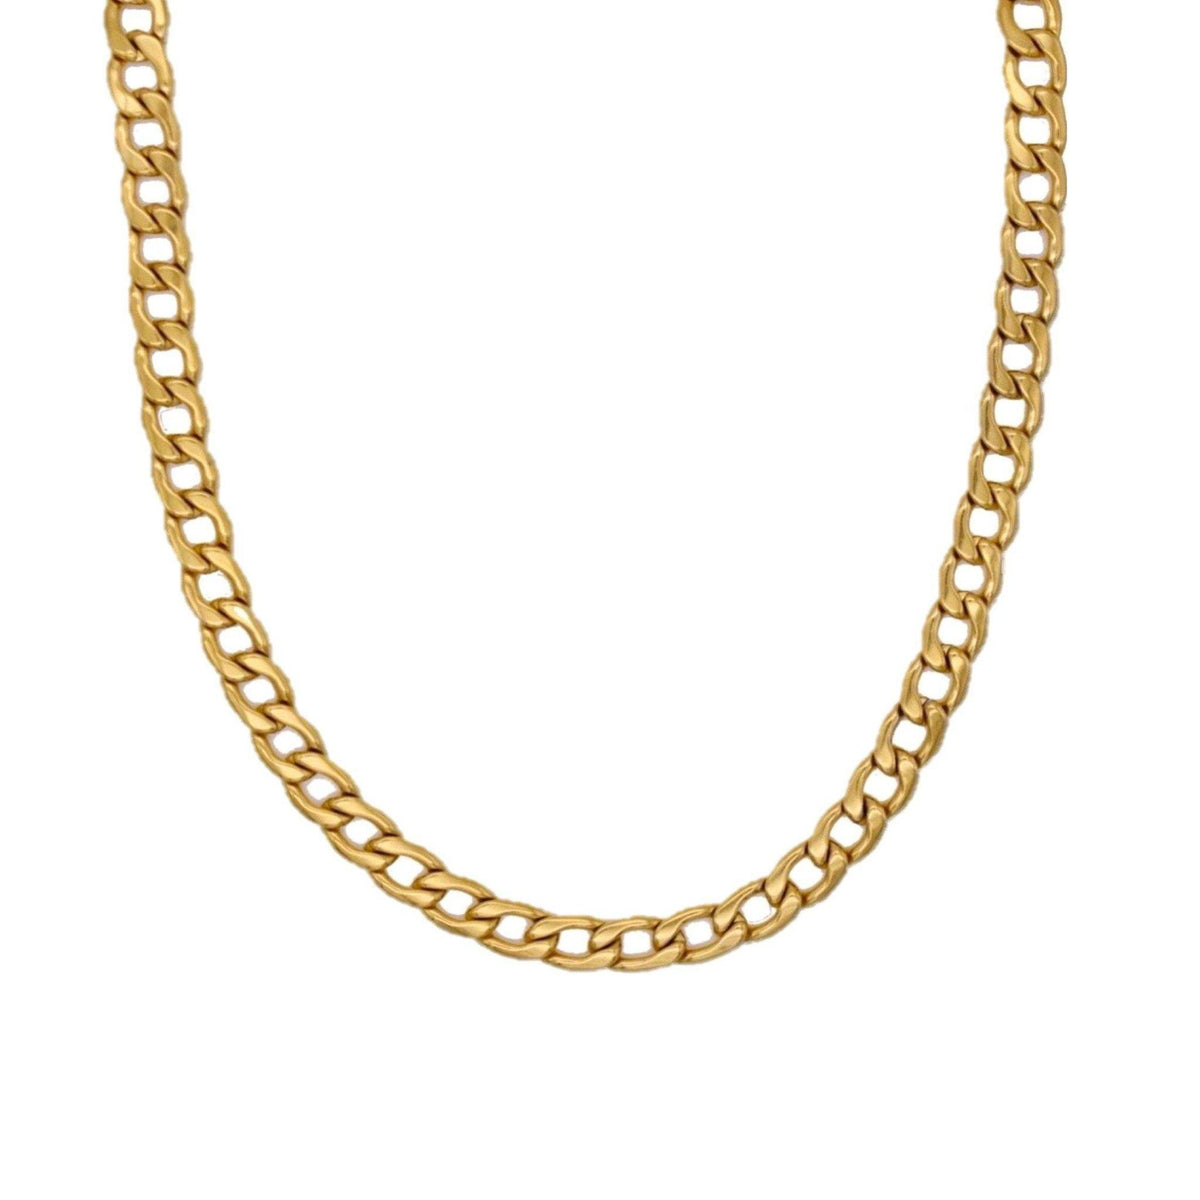 Brooklyn 6MM Chain Necklace - Taylor Adorn